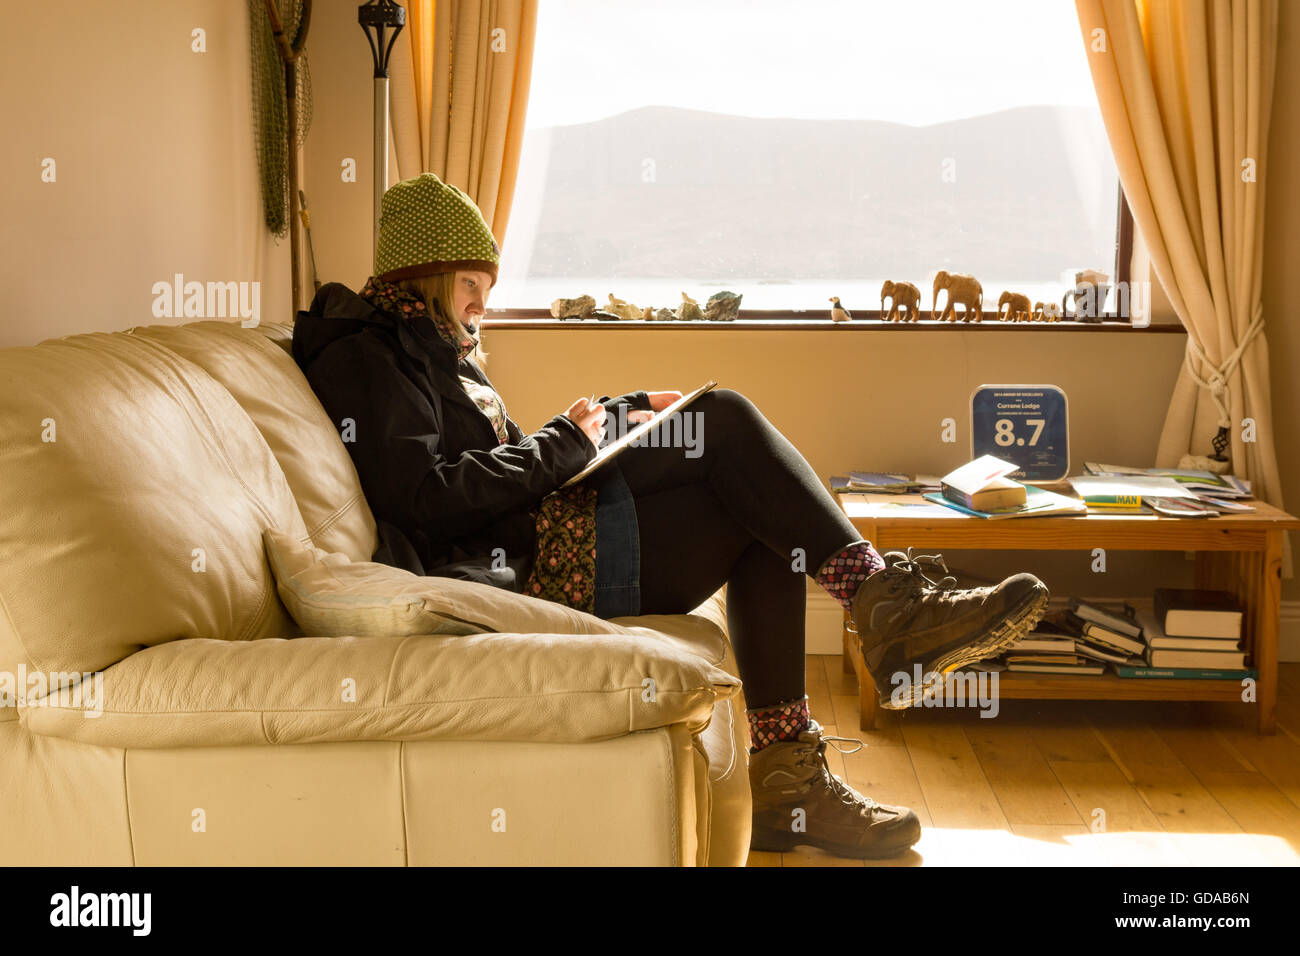 Ireland, Kerry, County Kerry, Accommodation at Lough Currane, Lake, Woman with warm clothes in living room Stock Photo